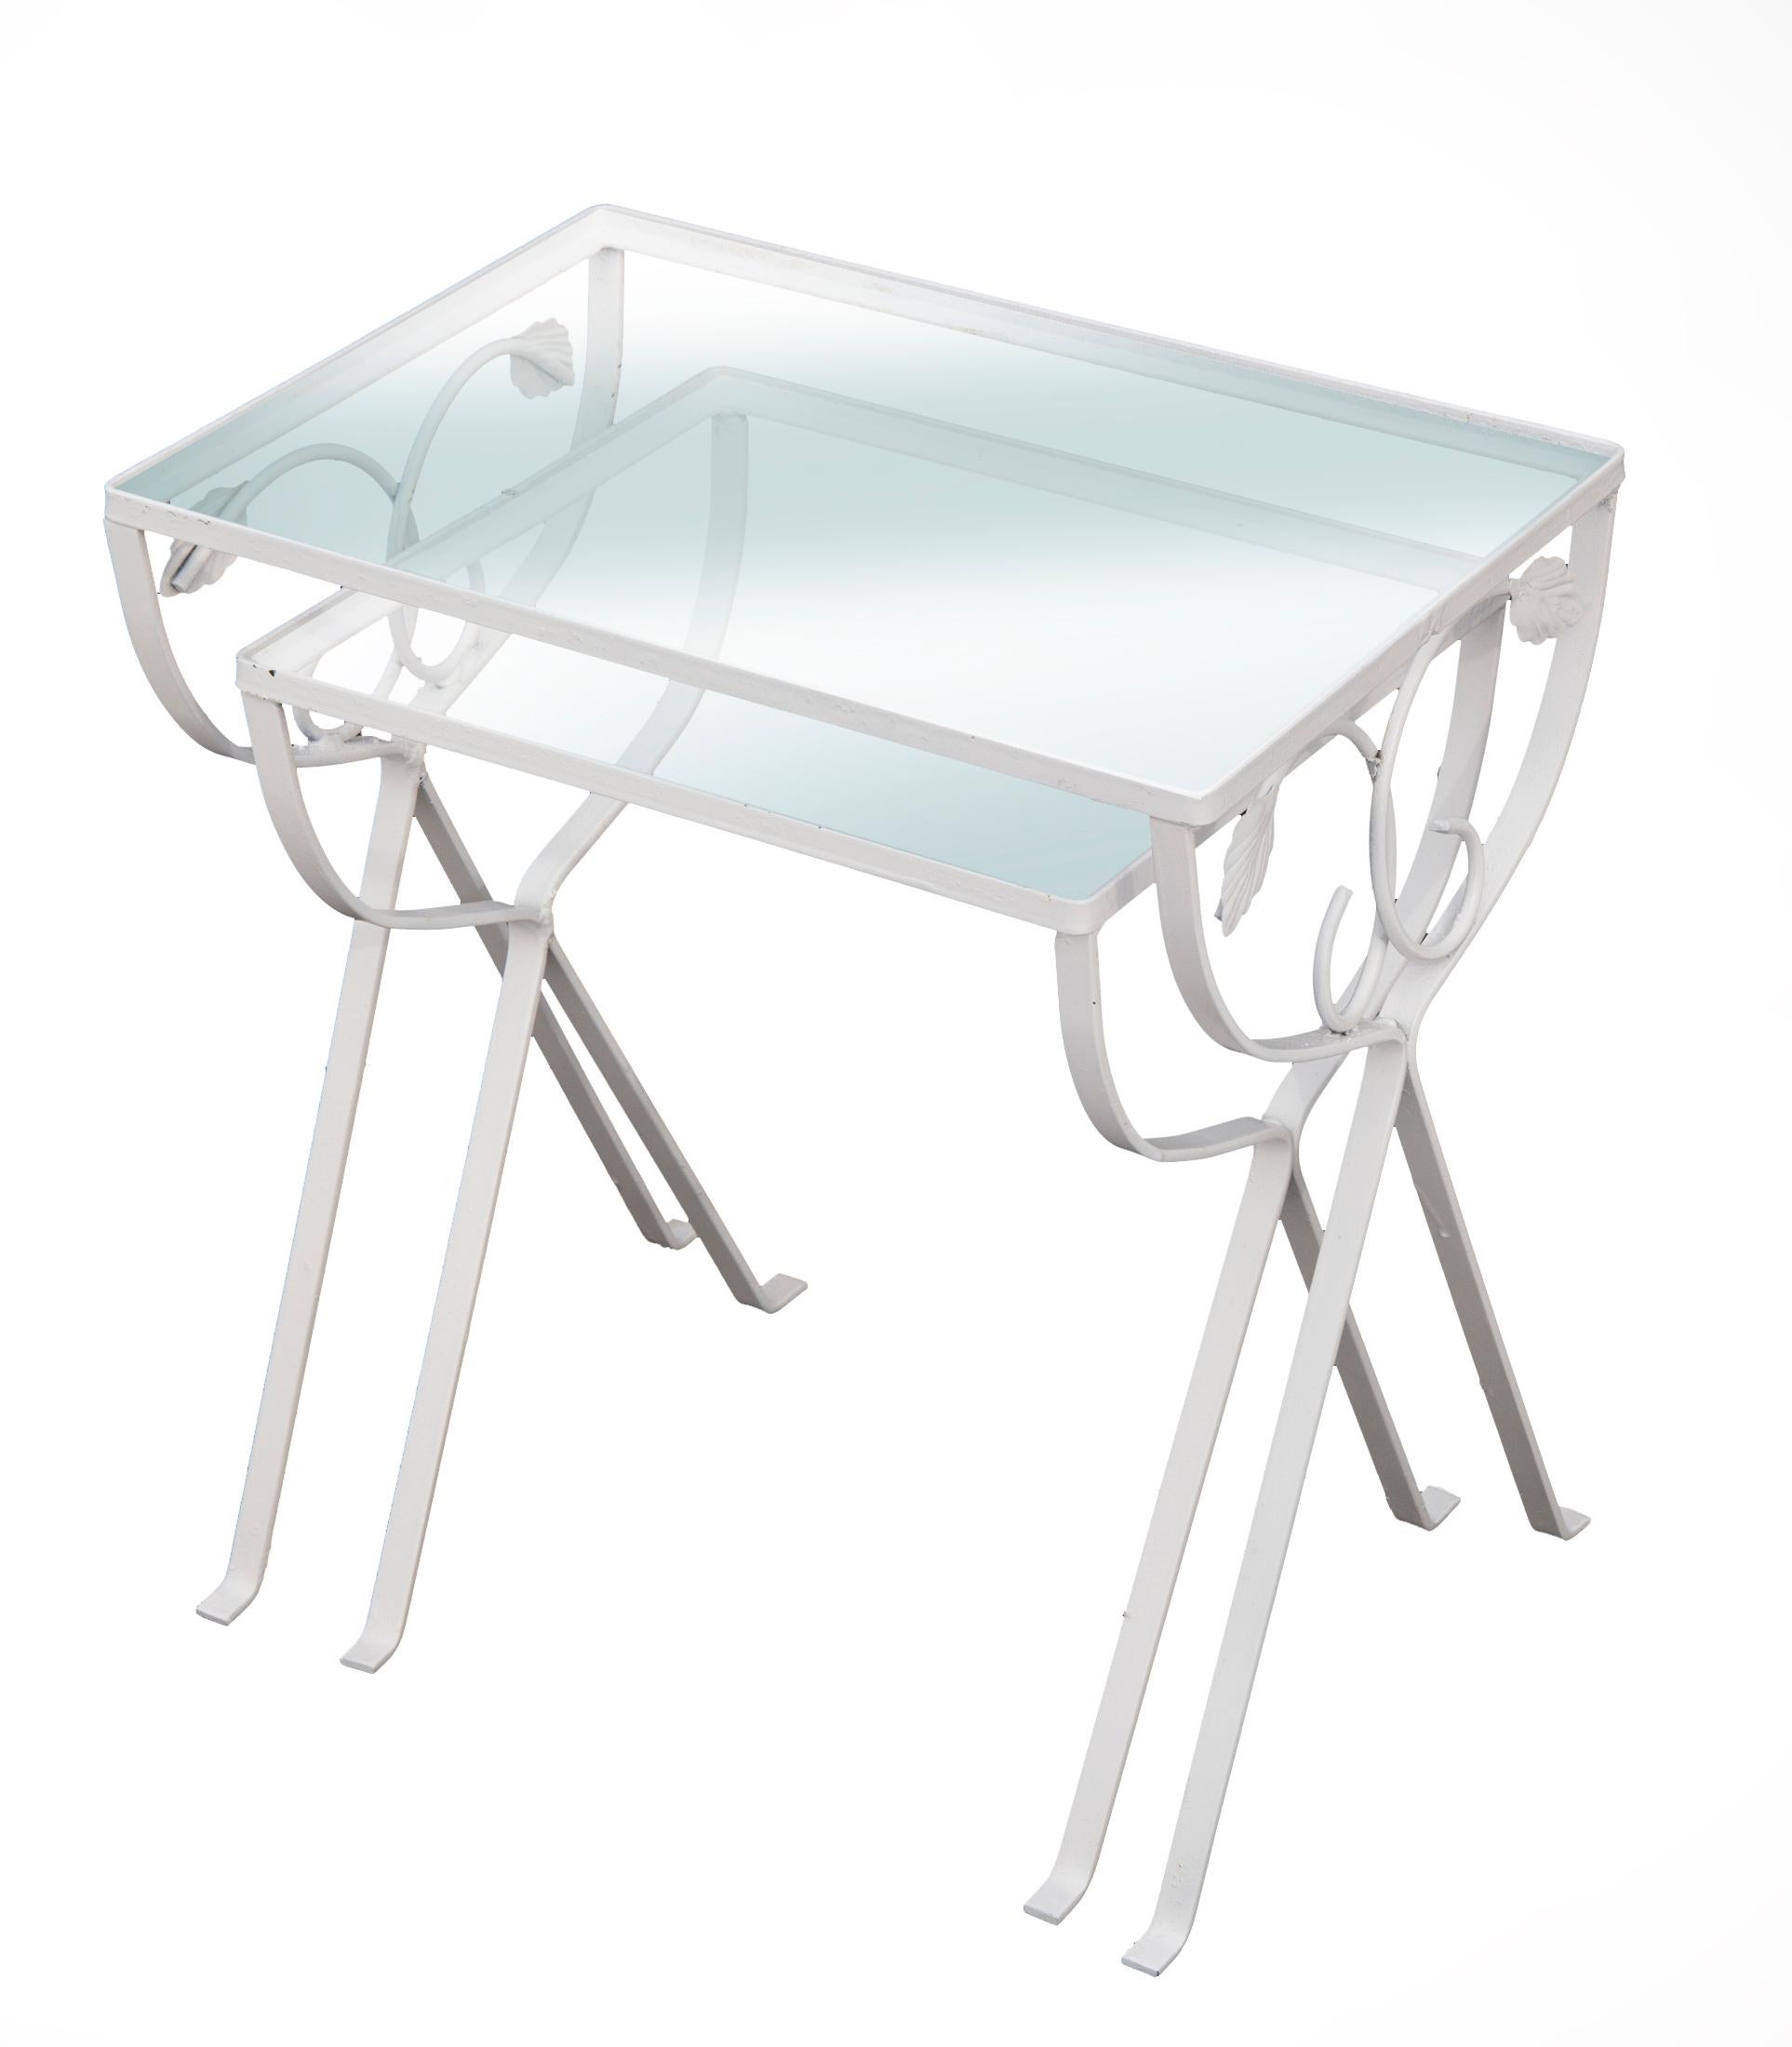 Wrought iron nesting tables, white with glass tops.
Vintage glass topped stacking tables have a traditional curved vine and leaf pattern. Painted in white. Strong and sturdy in a versatile size designed for patio use, but a nice accent for sunroom